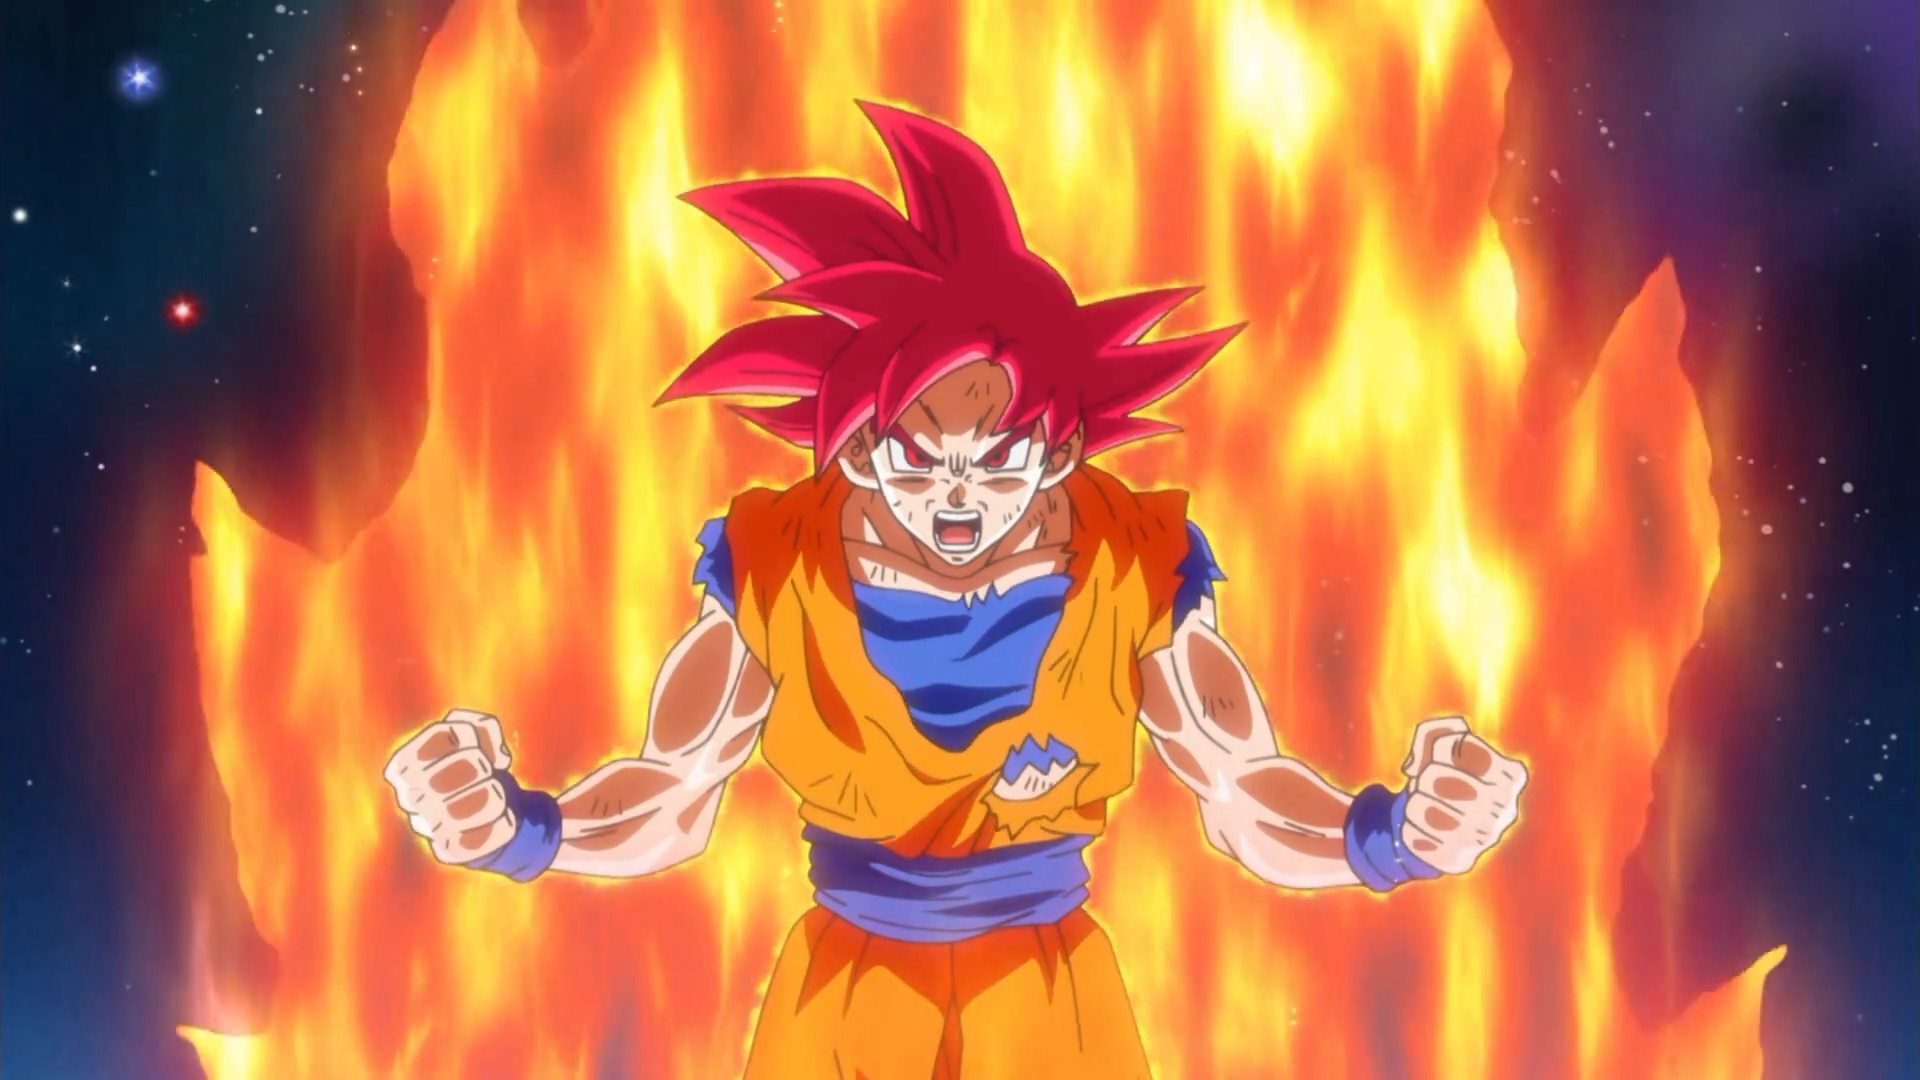 Dragon Ball: 10 Trivia And Facts Fans Need To Know About Super Saiyan God